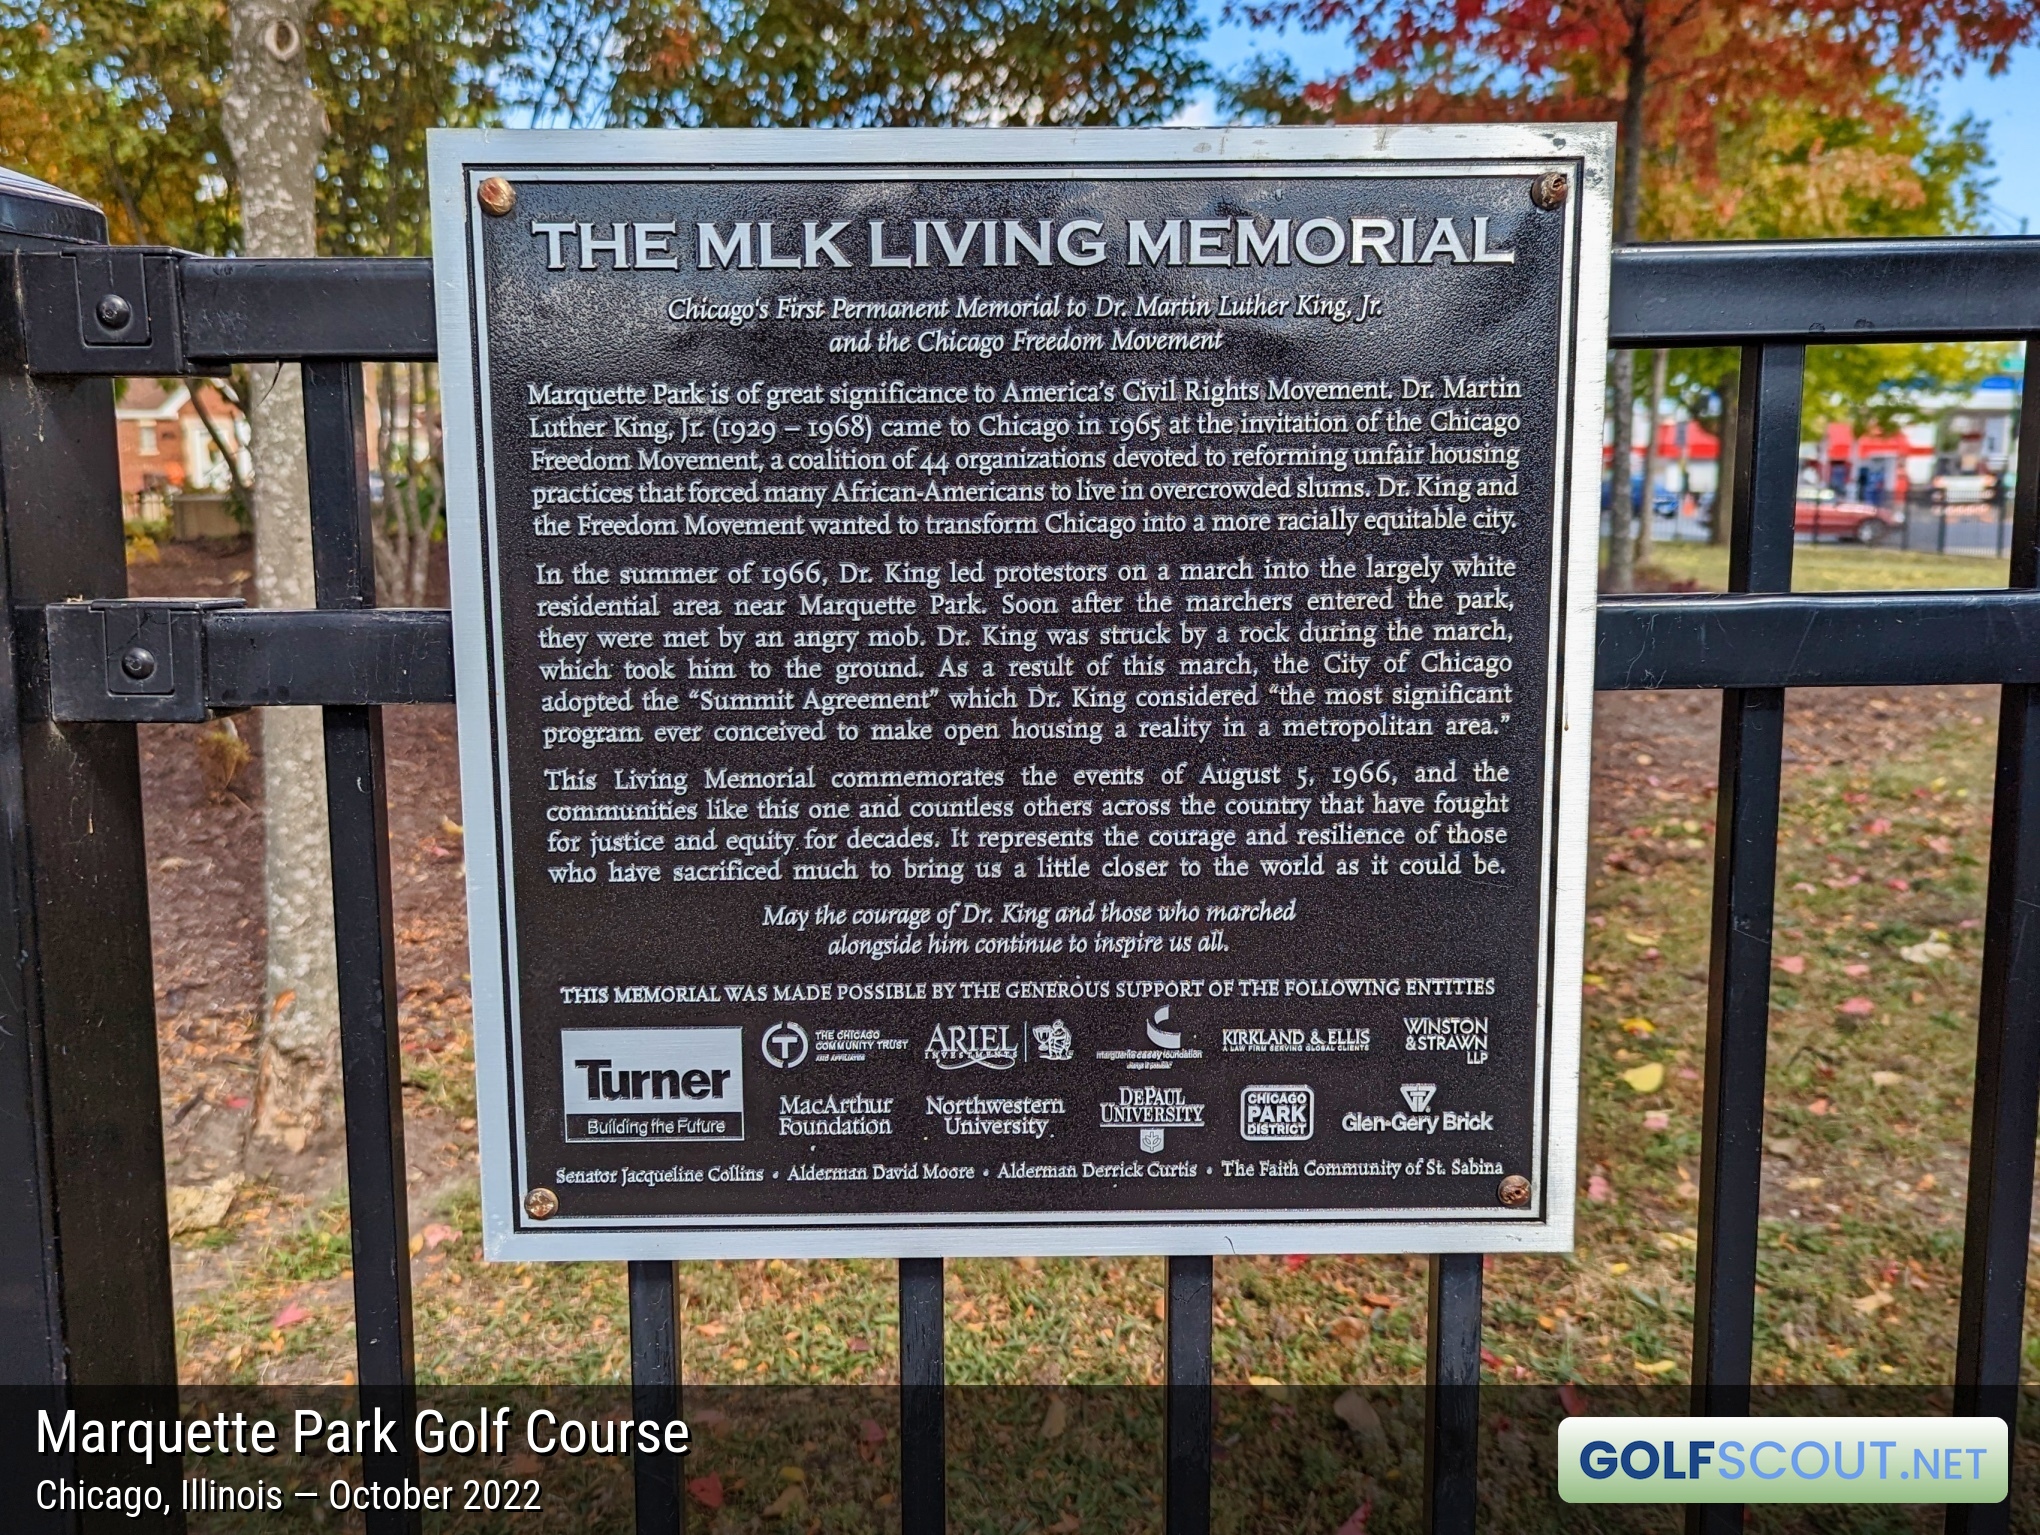 Miscellaneous photo of Marquette Park Golf Course in Chicago, Illinois. A sign at the MLK Living Memorial, which is across the street from Marquette Park Golf Course. It states "Chicago's First Permanent Memorial to Dr. Martin Luther King Jr and the Chicago Freedom Movement." It was installed in 2016, 50 years after he marched here.